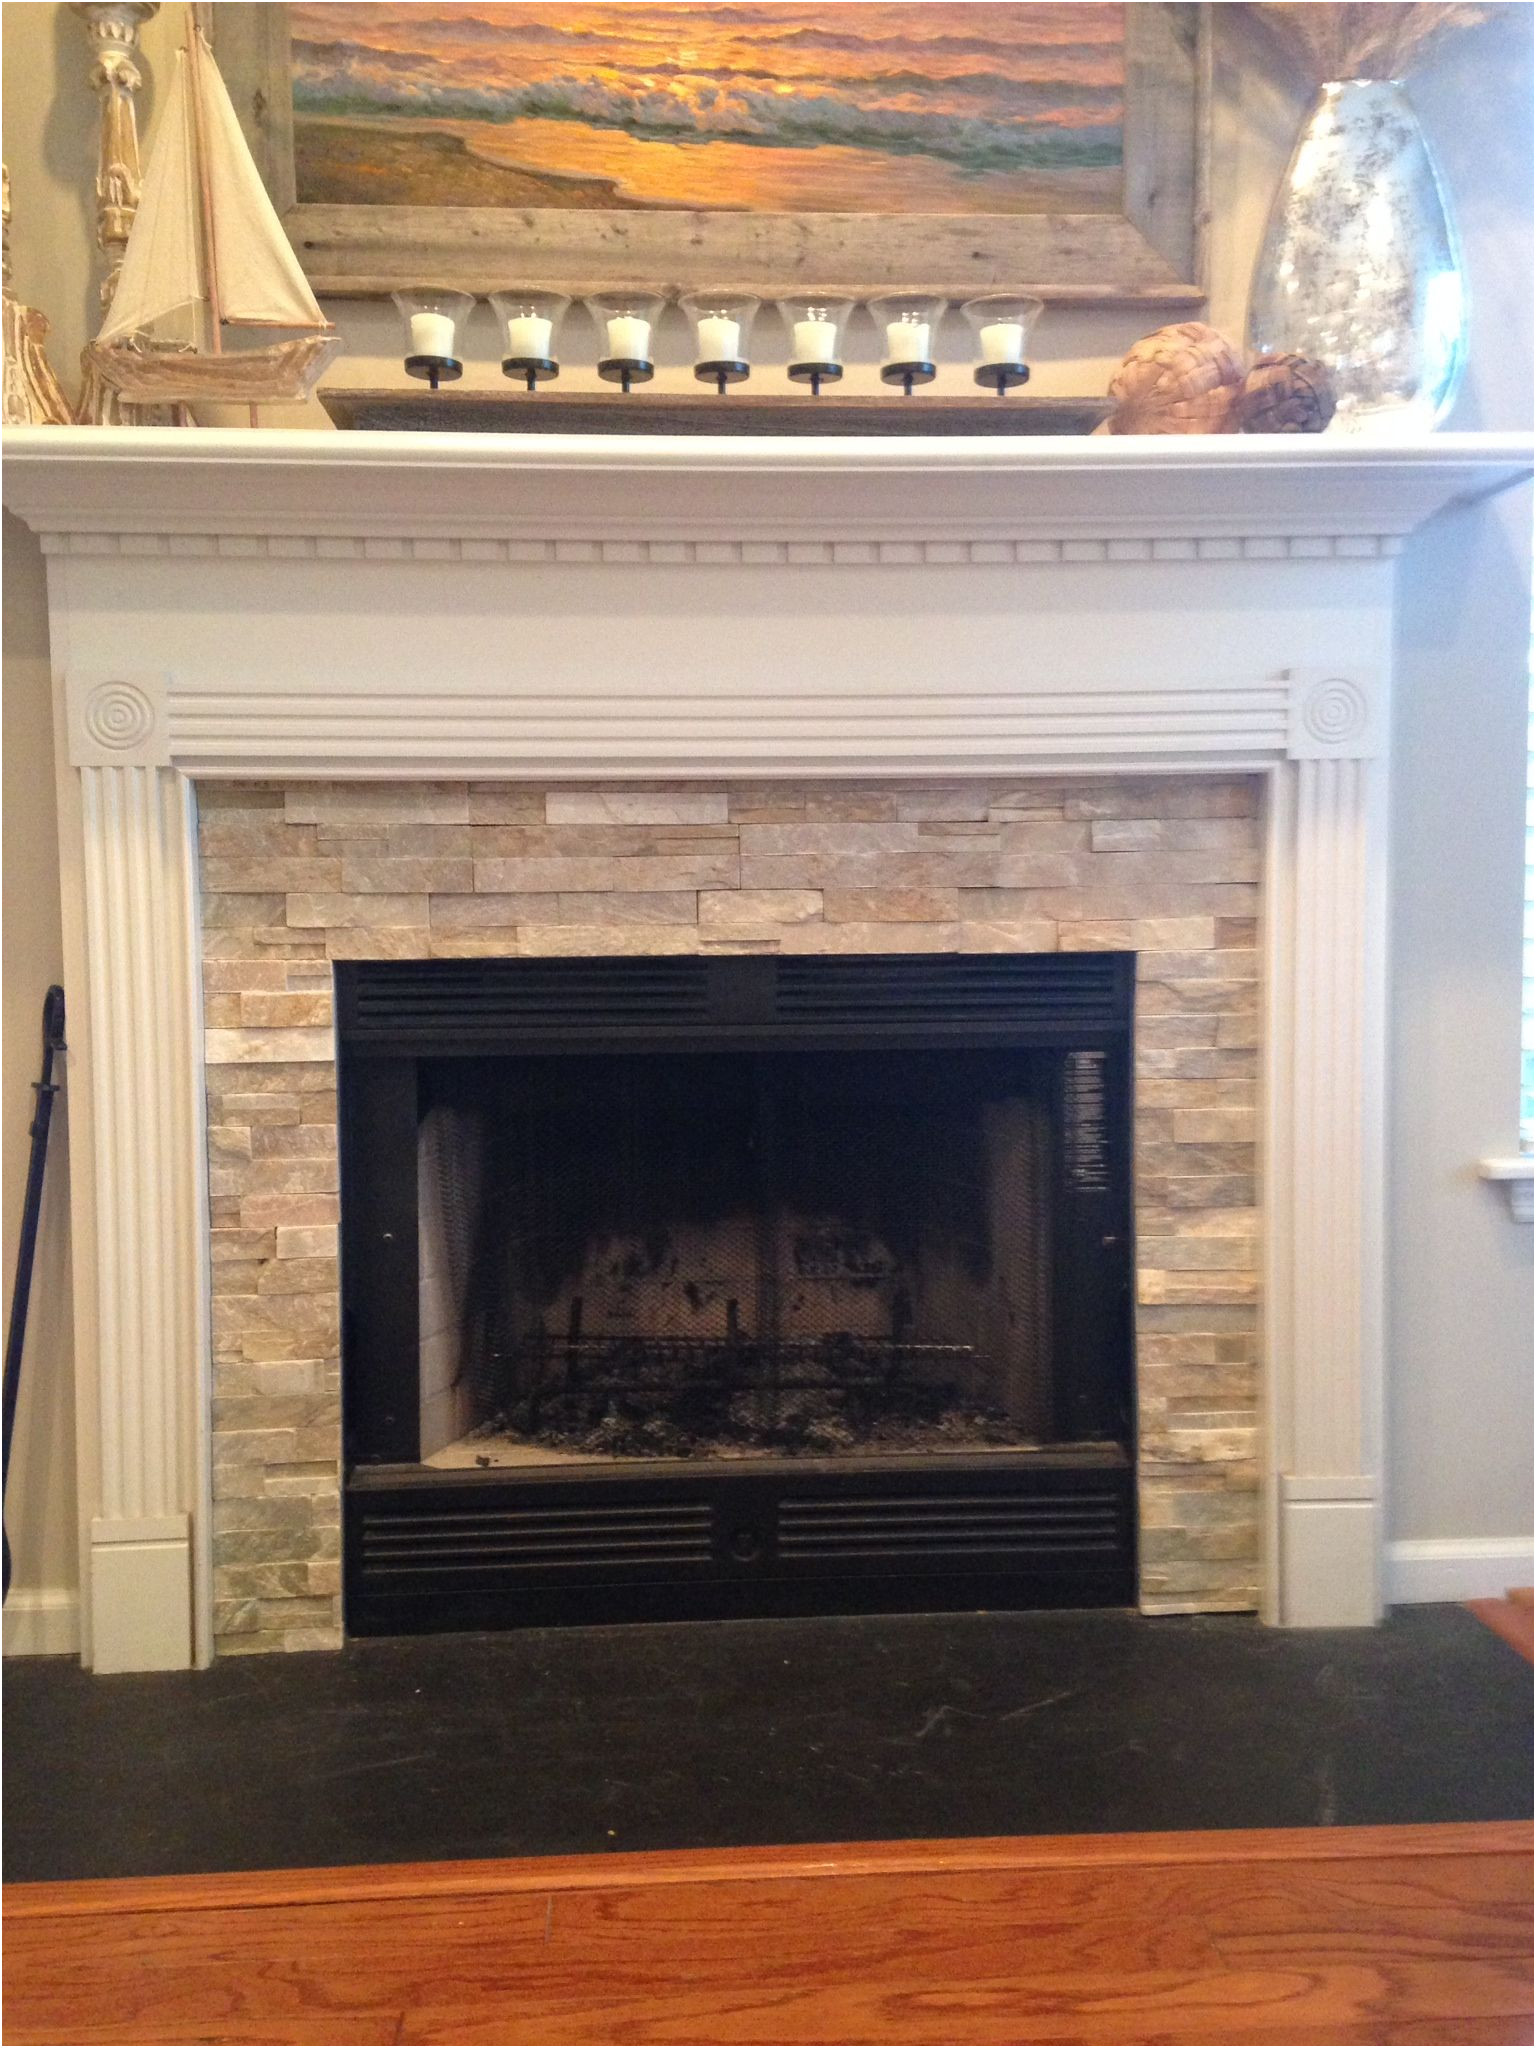 Fireplace Surround Ideas with Tile Lovely Fireplace Idea Mantel Wainscoting Design Craftsman